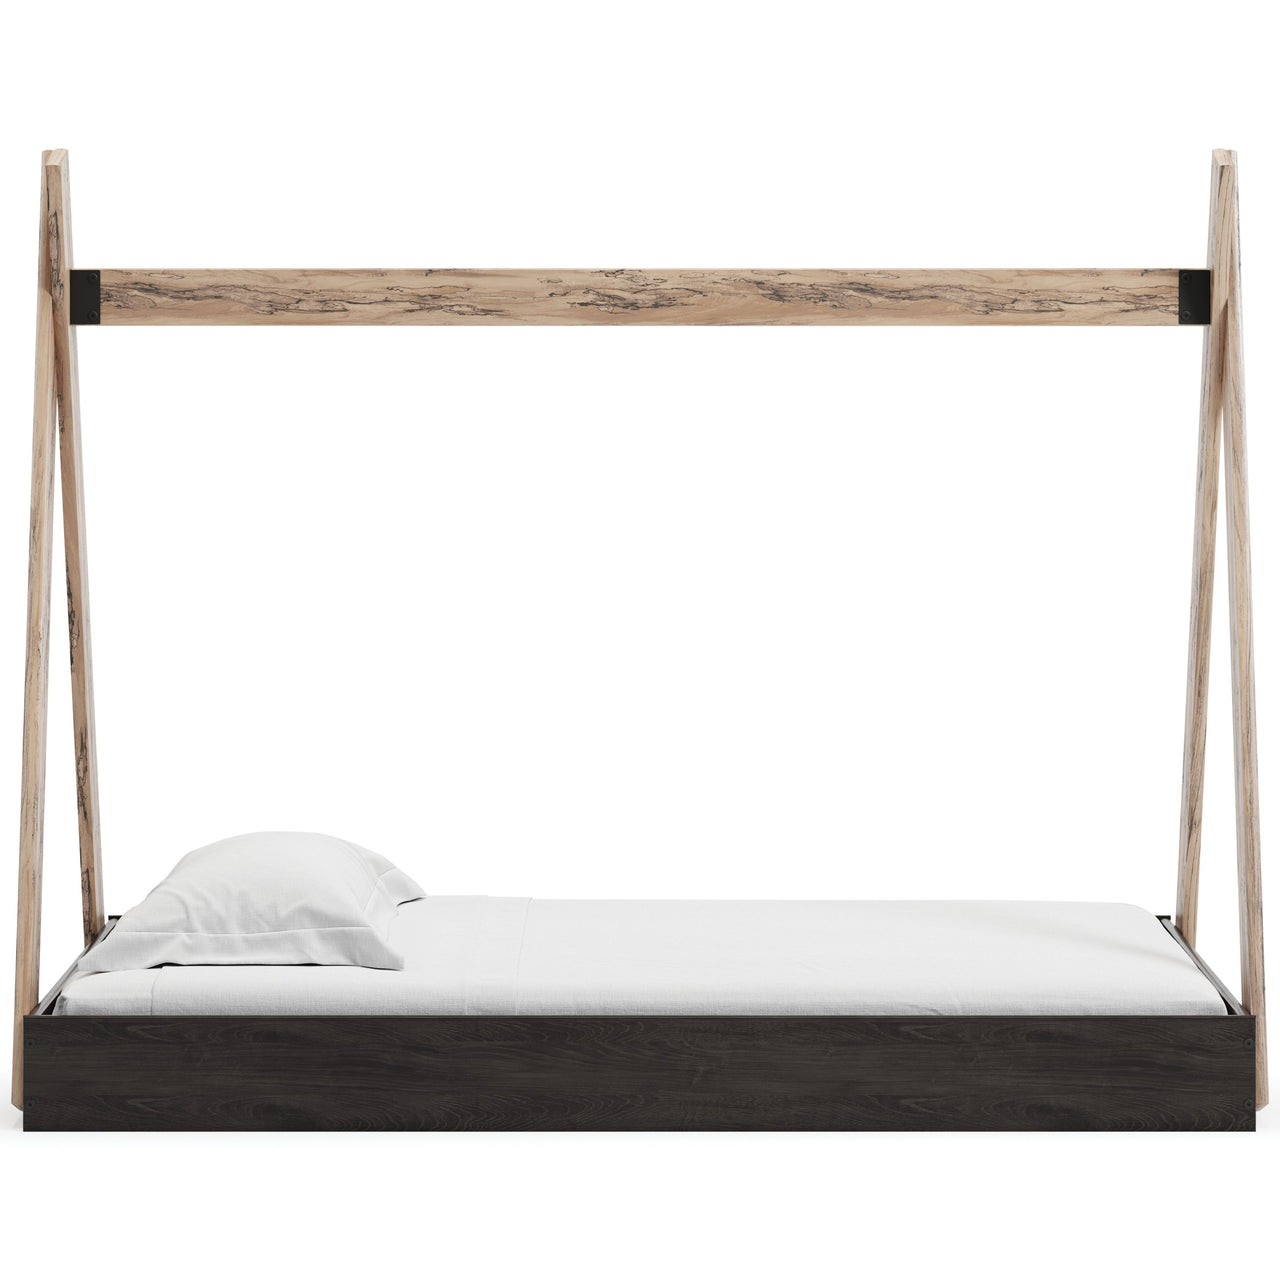 Piperton - Complete Bed In Box - Tony's Home Furnishings